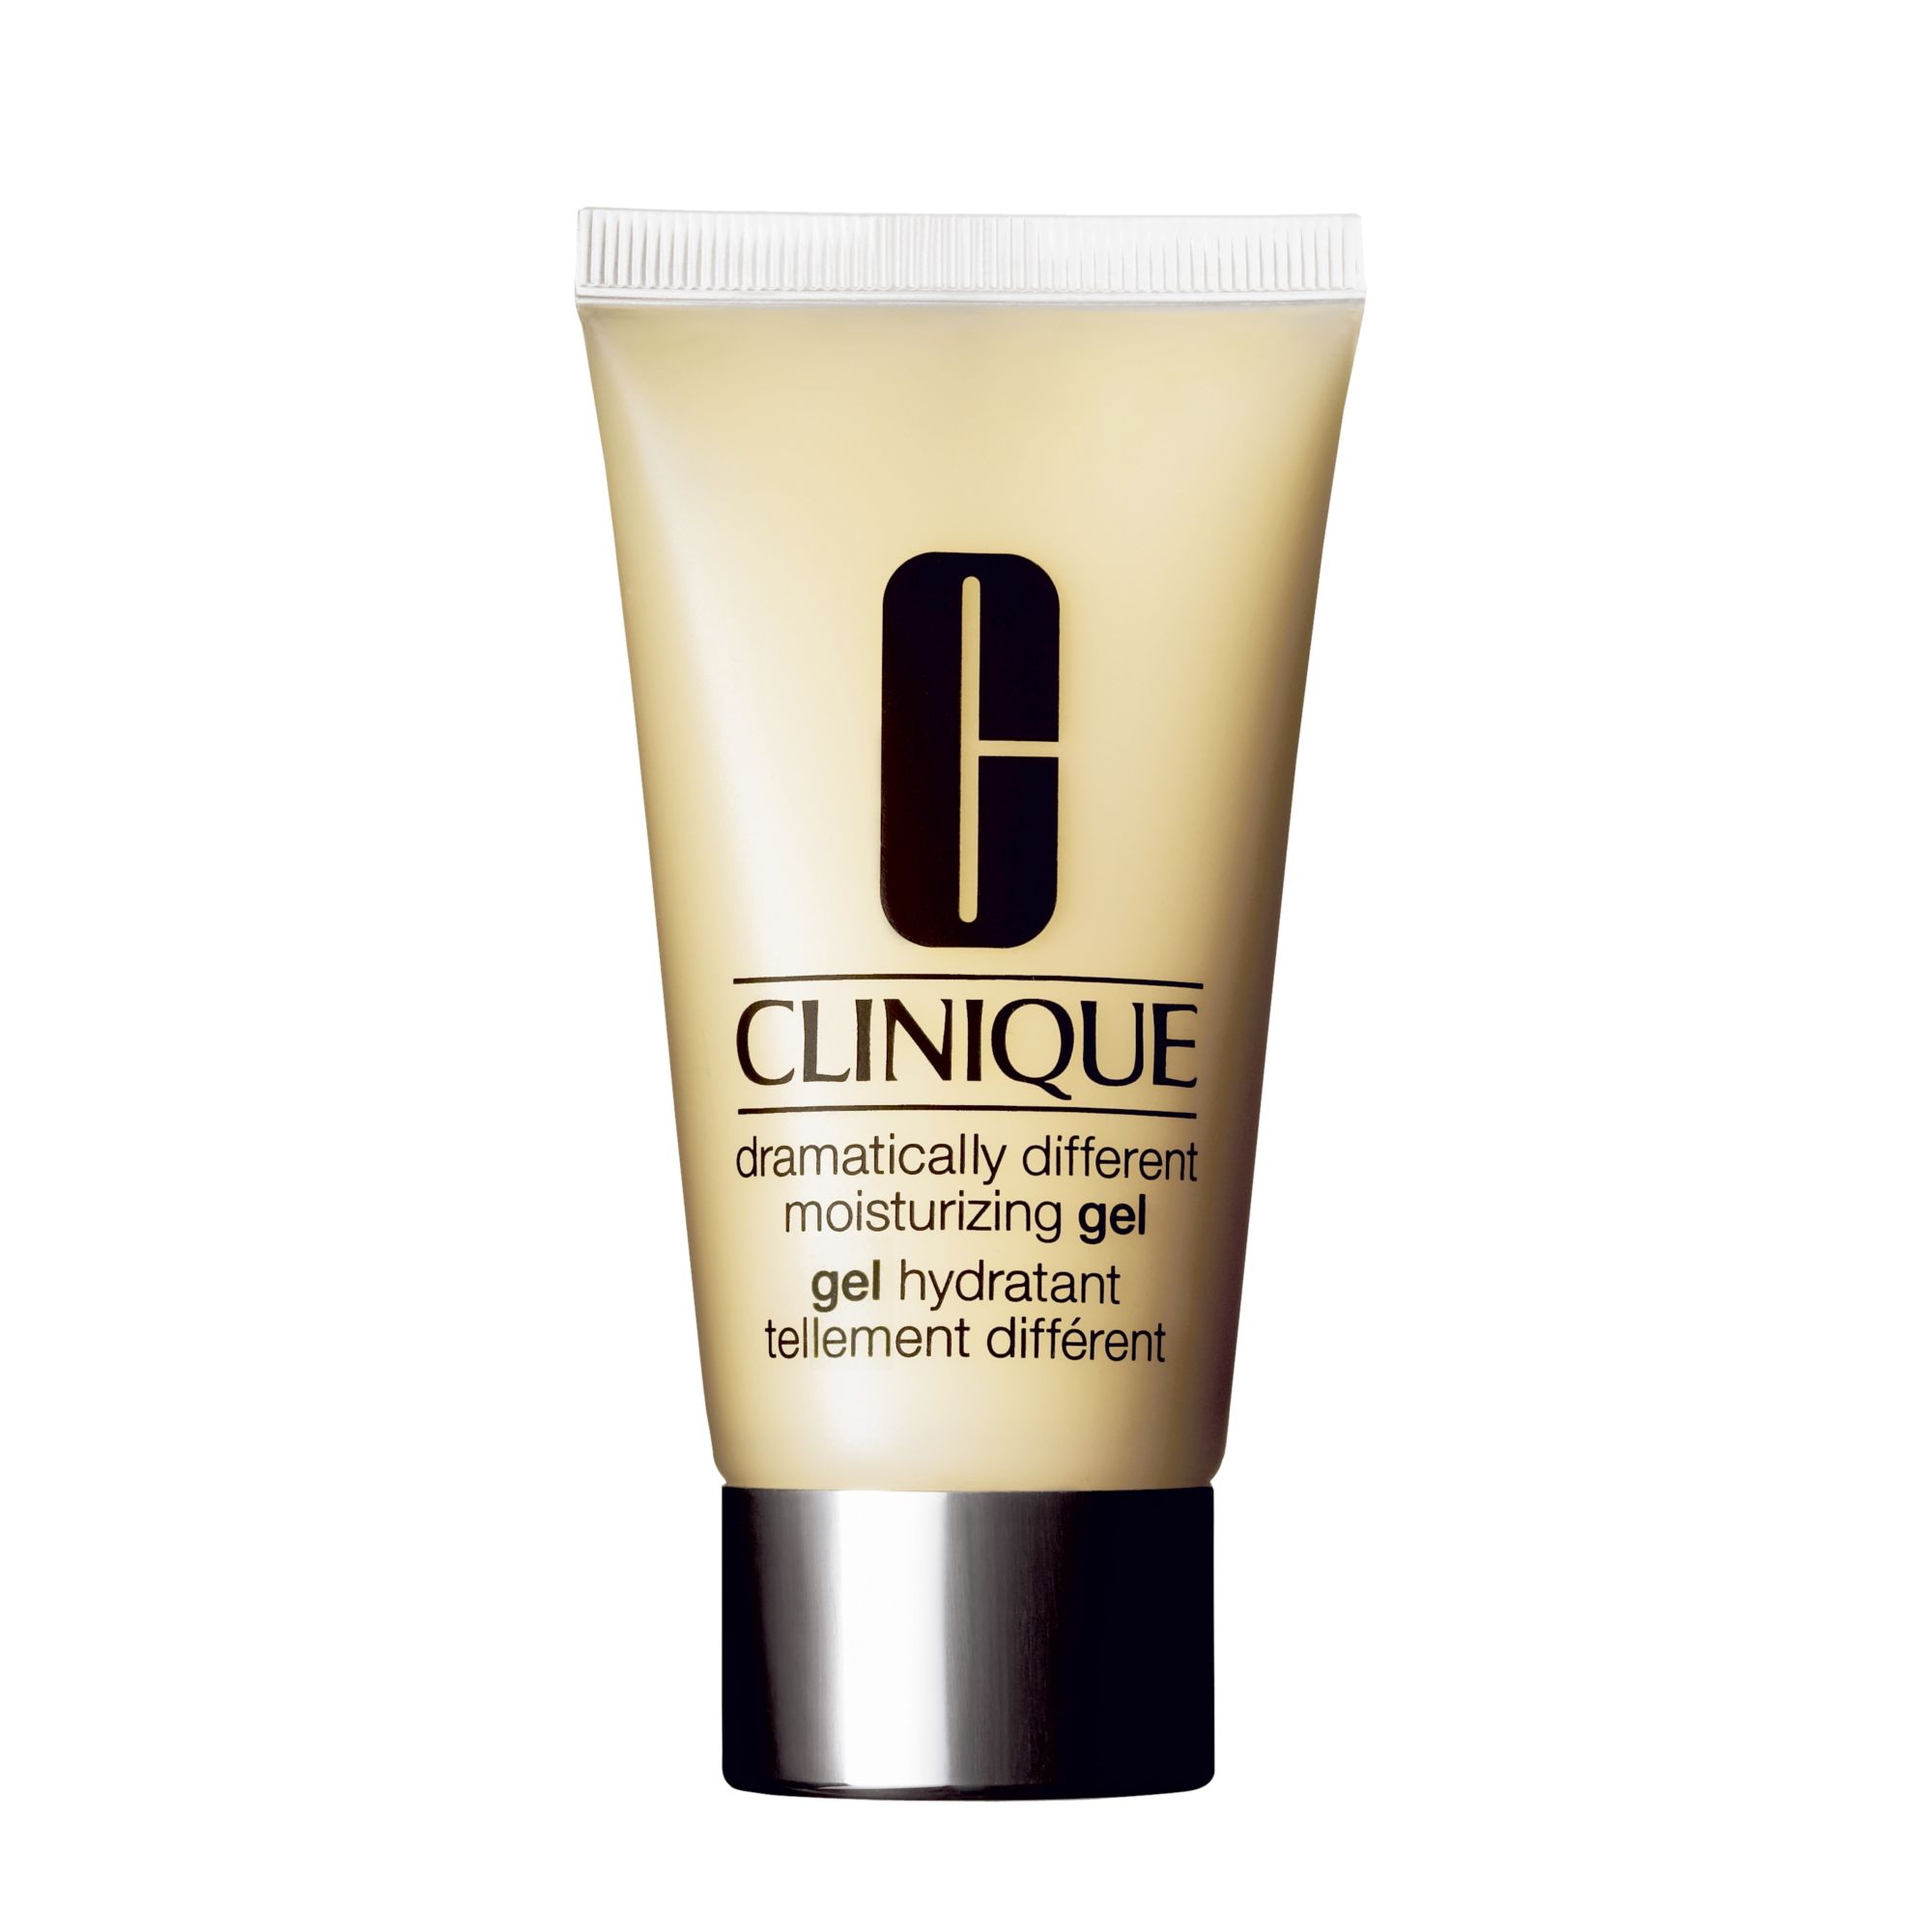 Clinique Dramatically Different Moisturising Gel In Tube - Combination to Oily Skin Types, 50ml 1